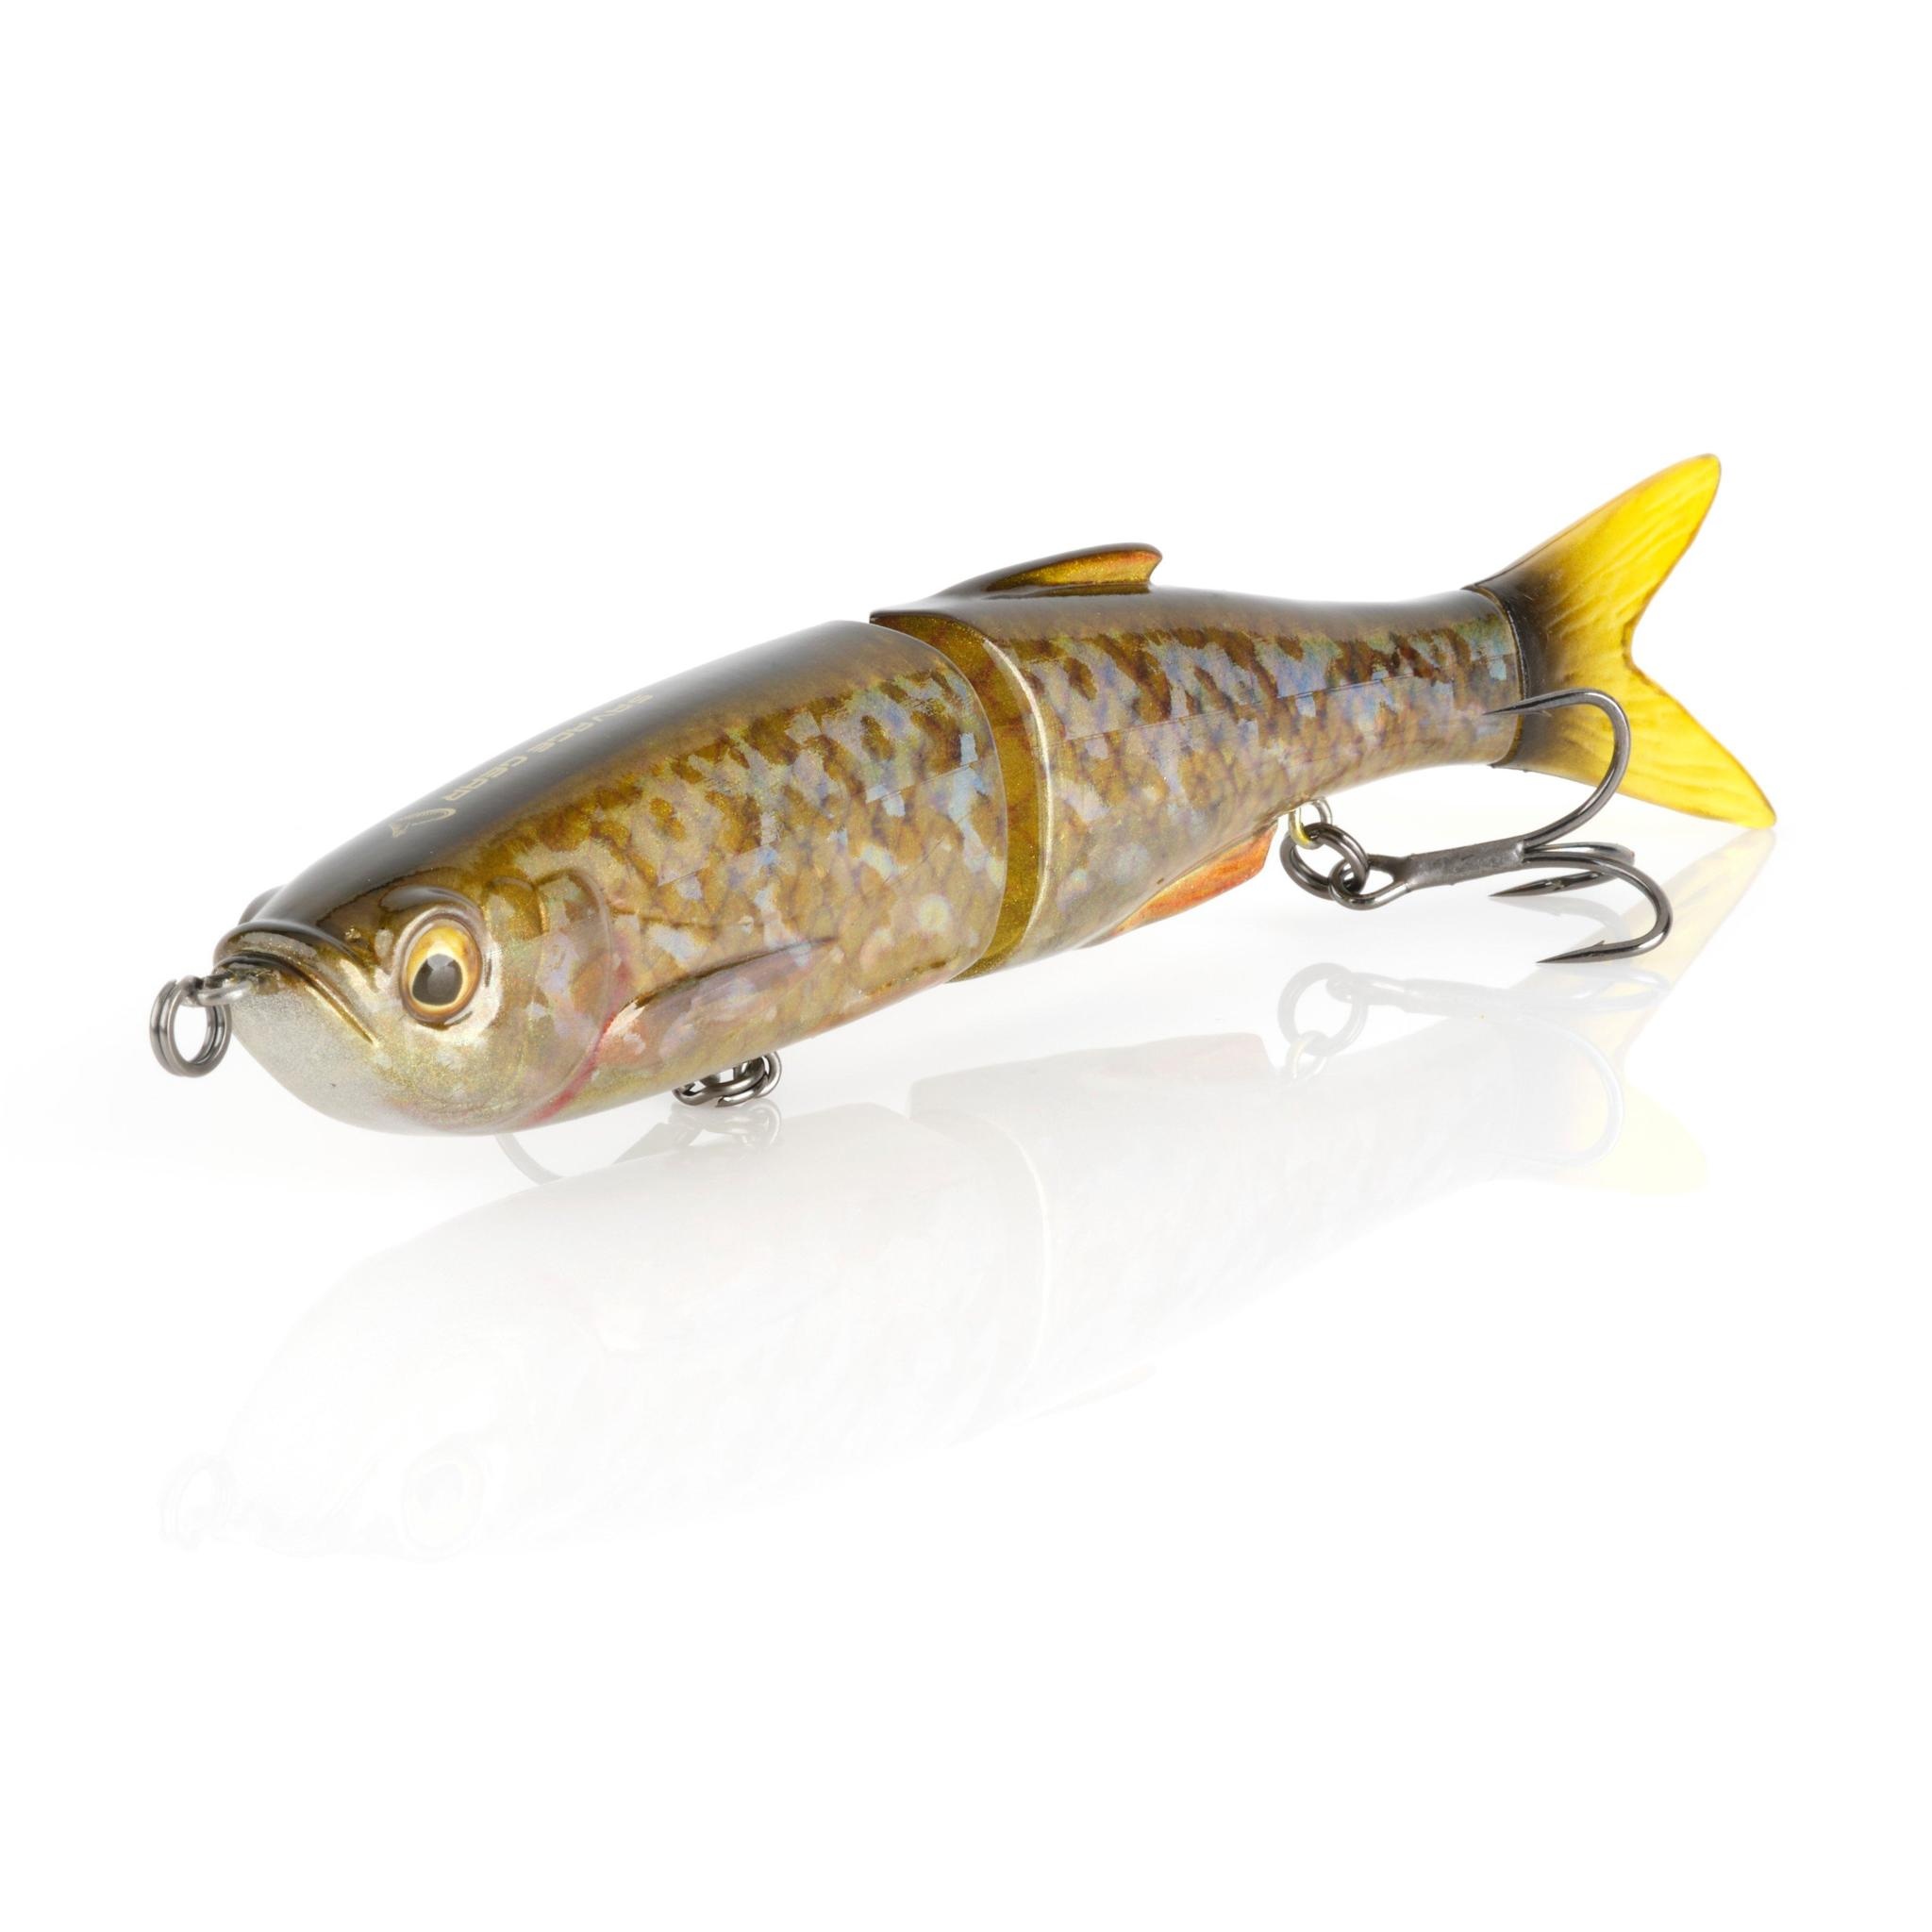 Savage Gear GS-135-BB Glide Swimmer 5.25 Baby Bass - Angler's Choice Tackle